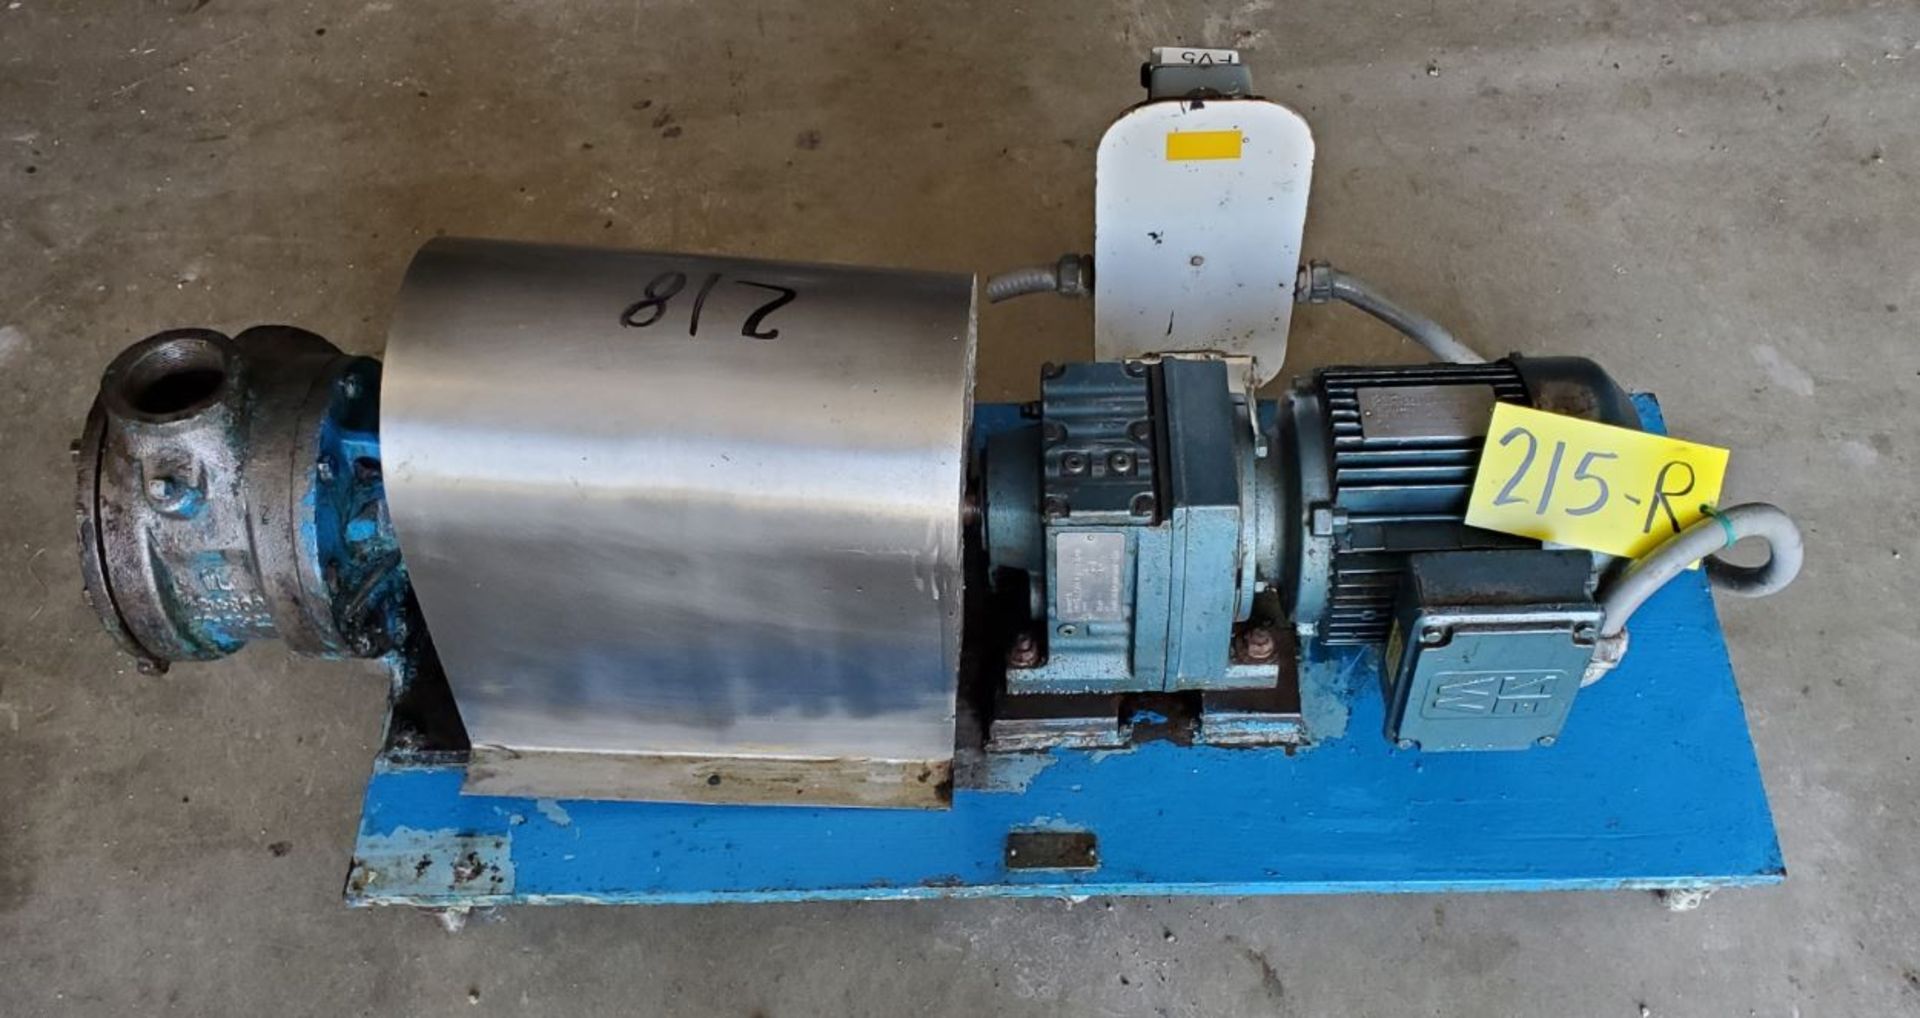 Viking Pump Model KK124A Stainless Steel wet parts on base, SEW Gear Box and Dual Voltage (230/